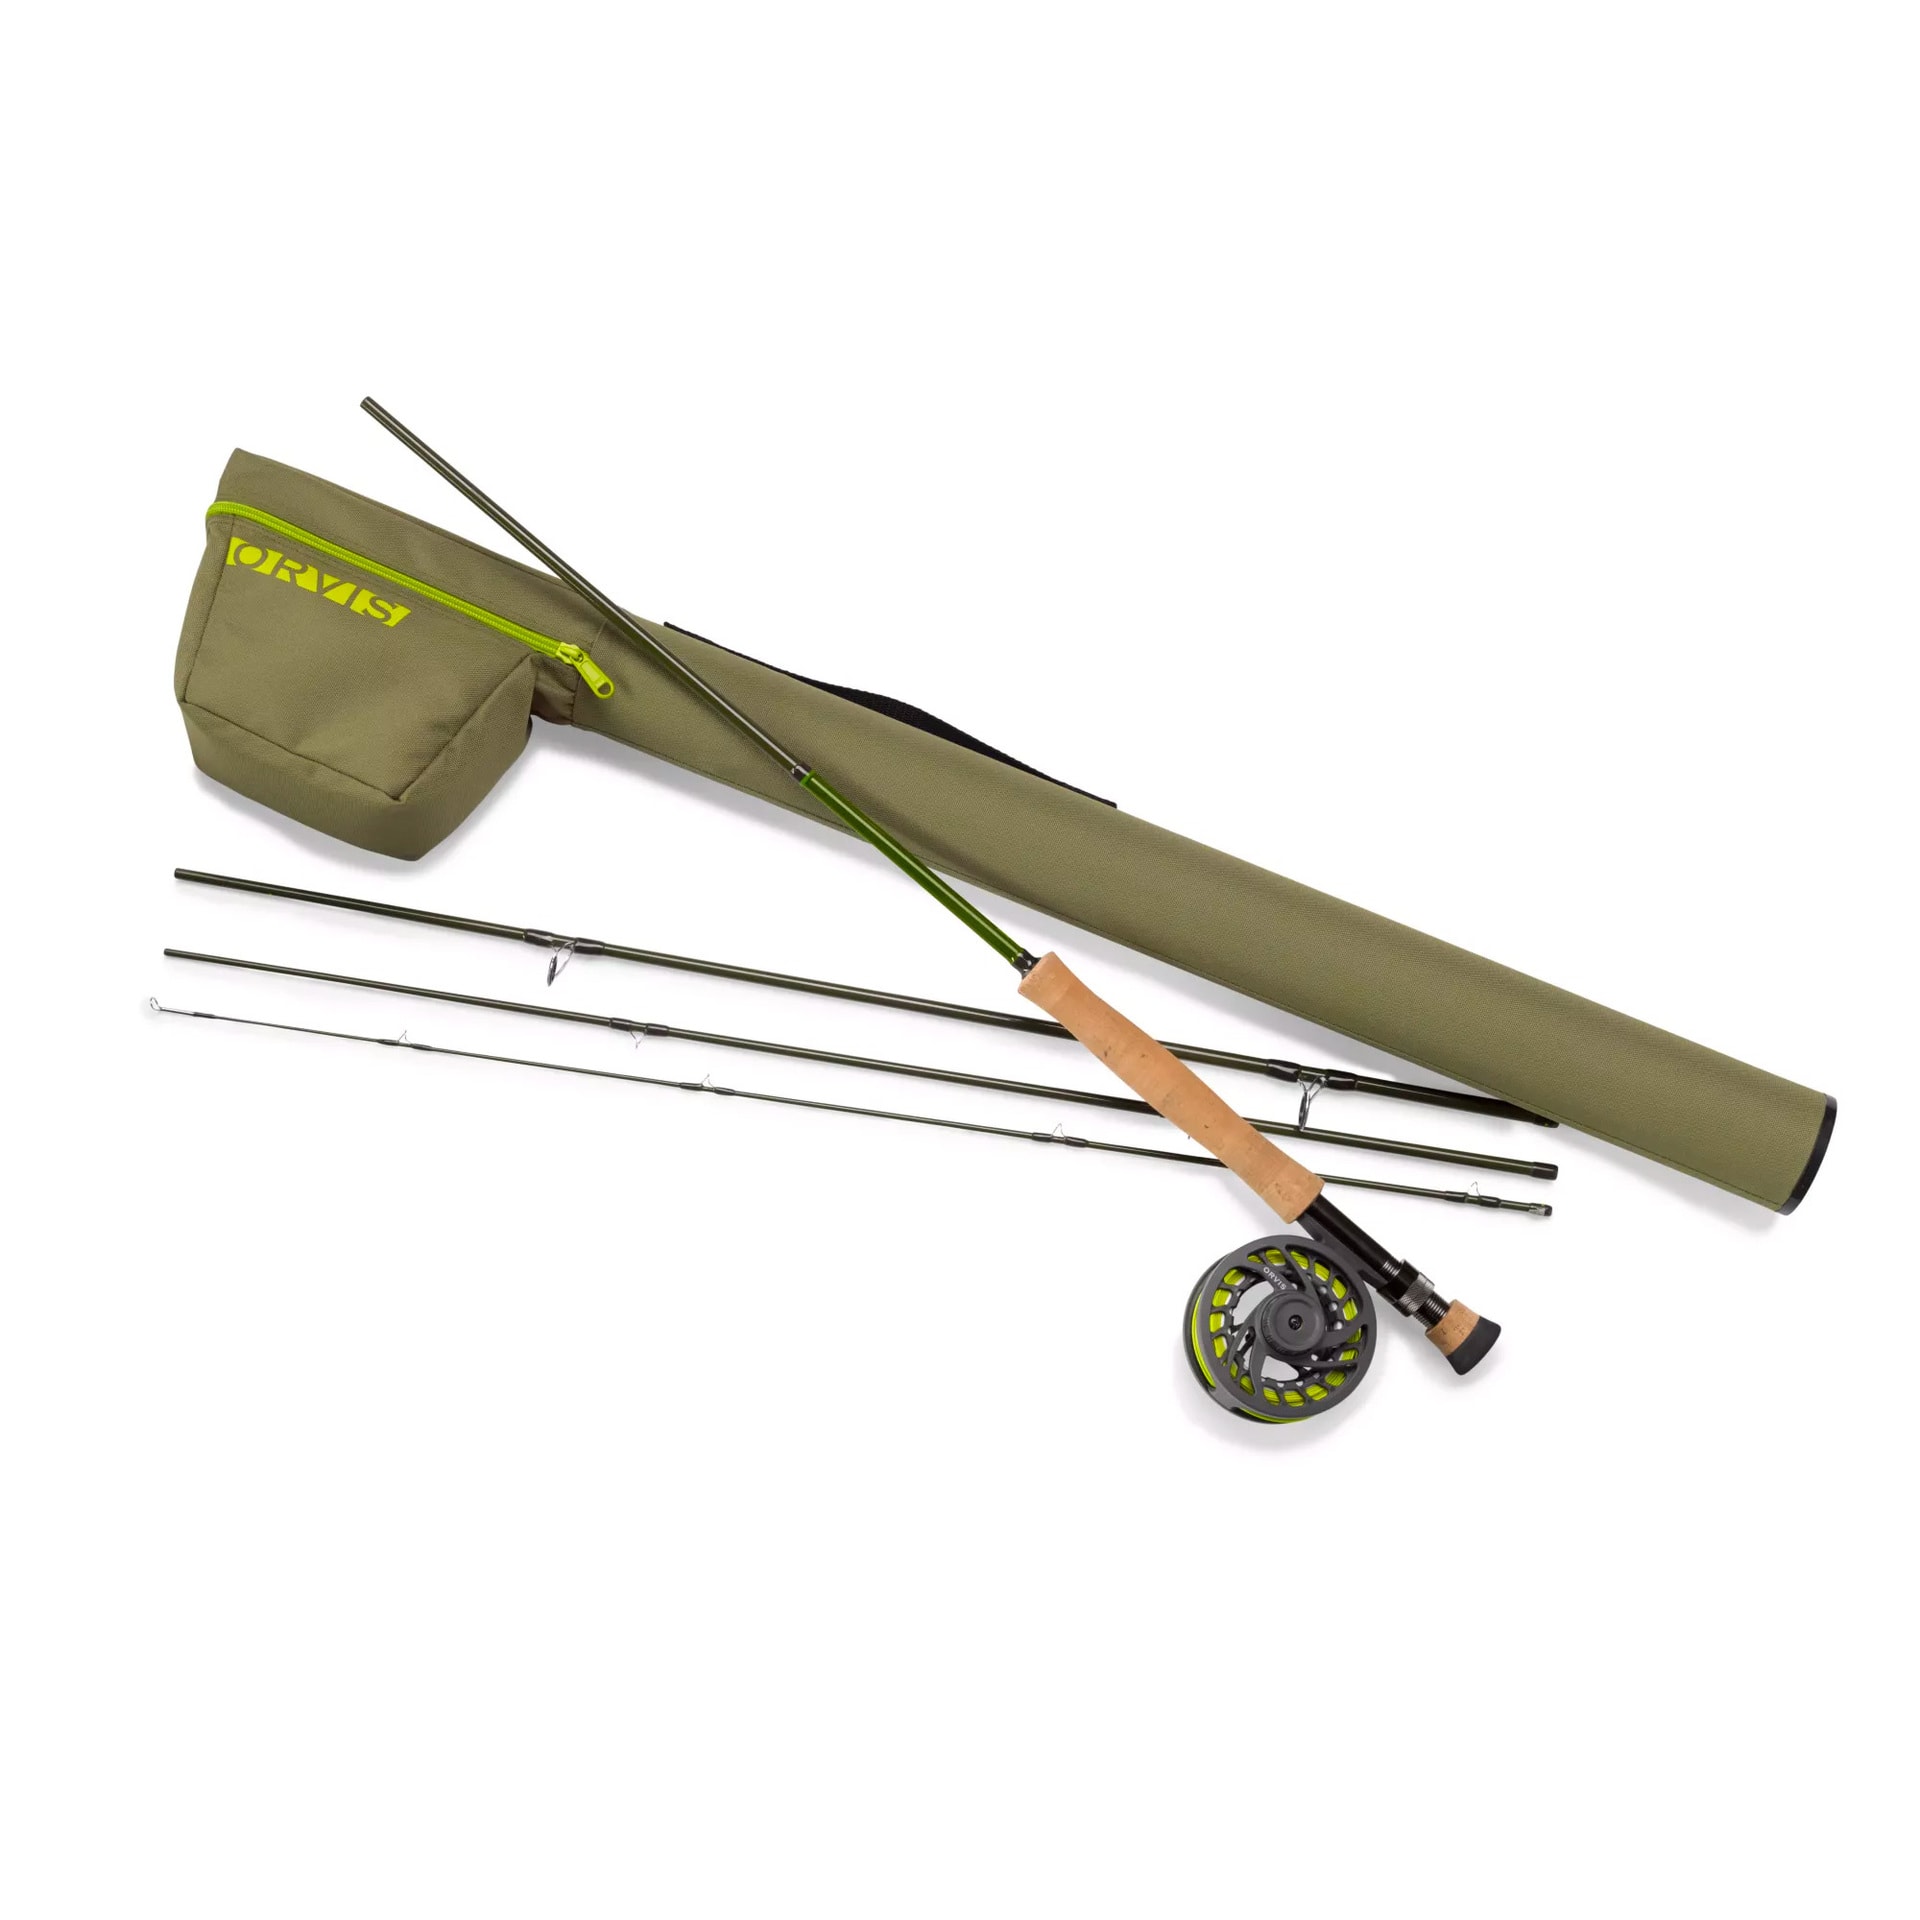 Orvis Encounter 8-Weight 9' Fly Rod Outfit